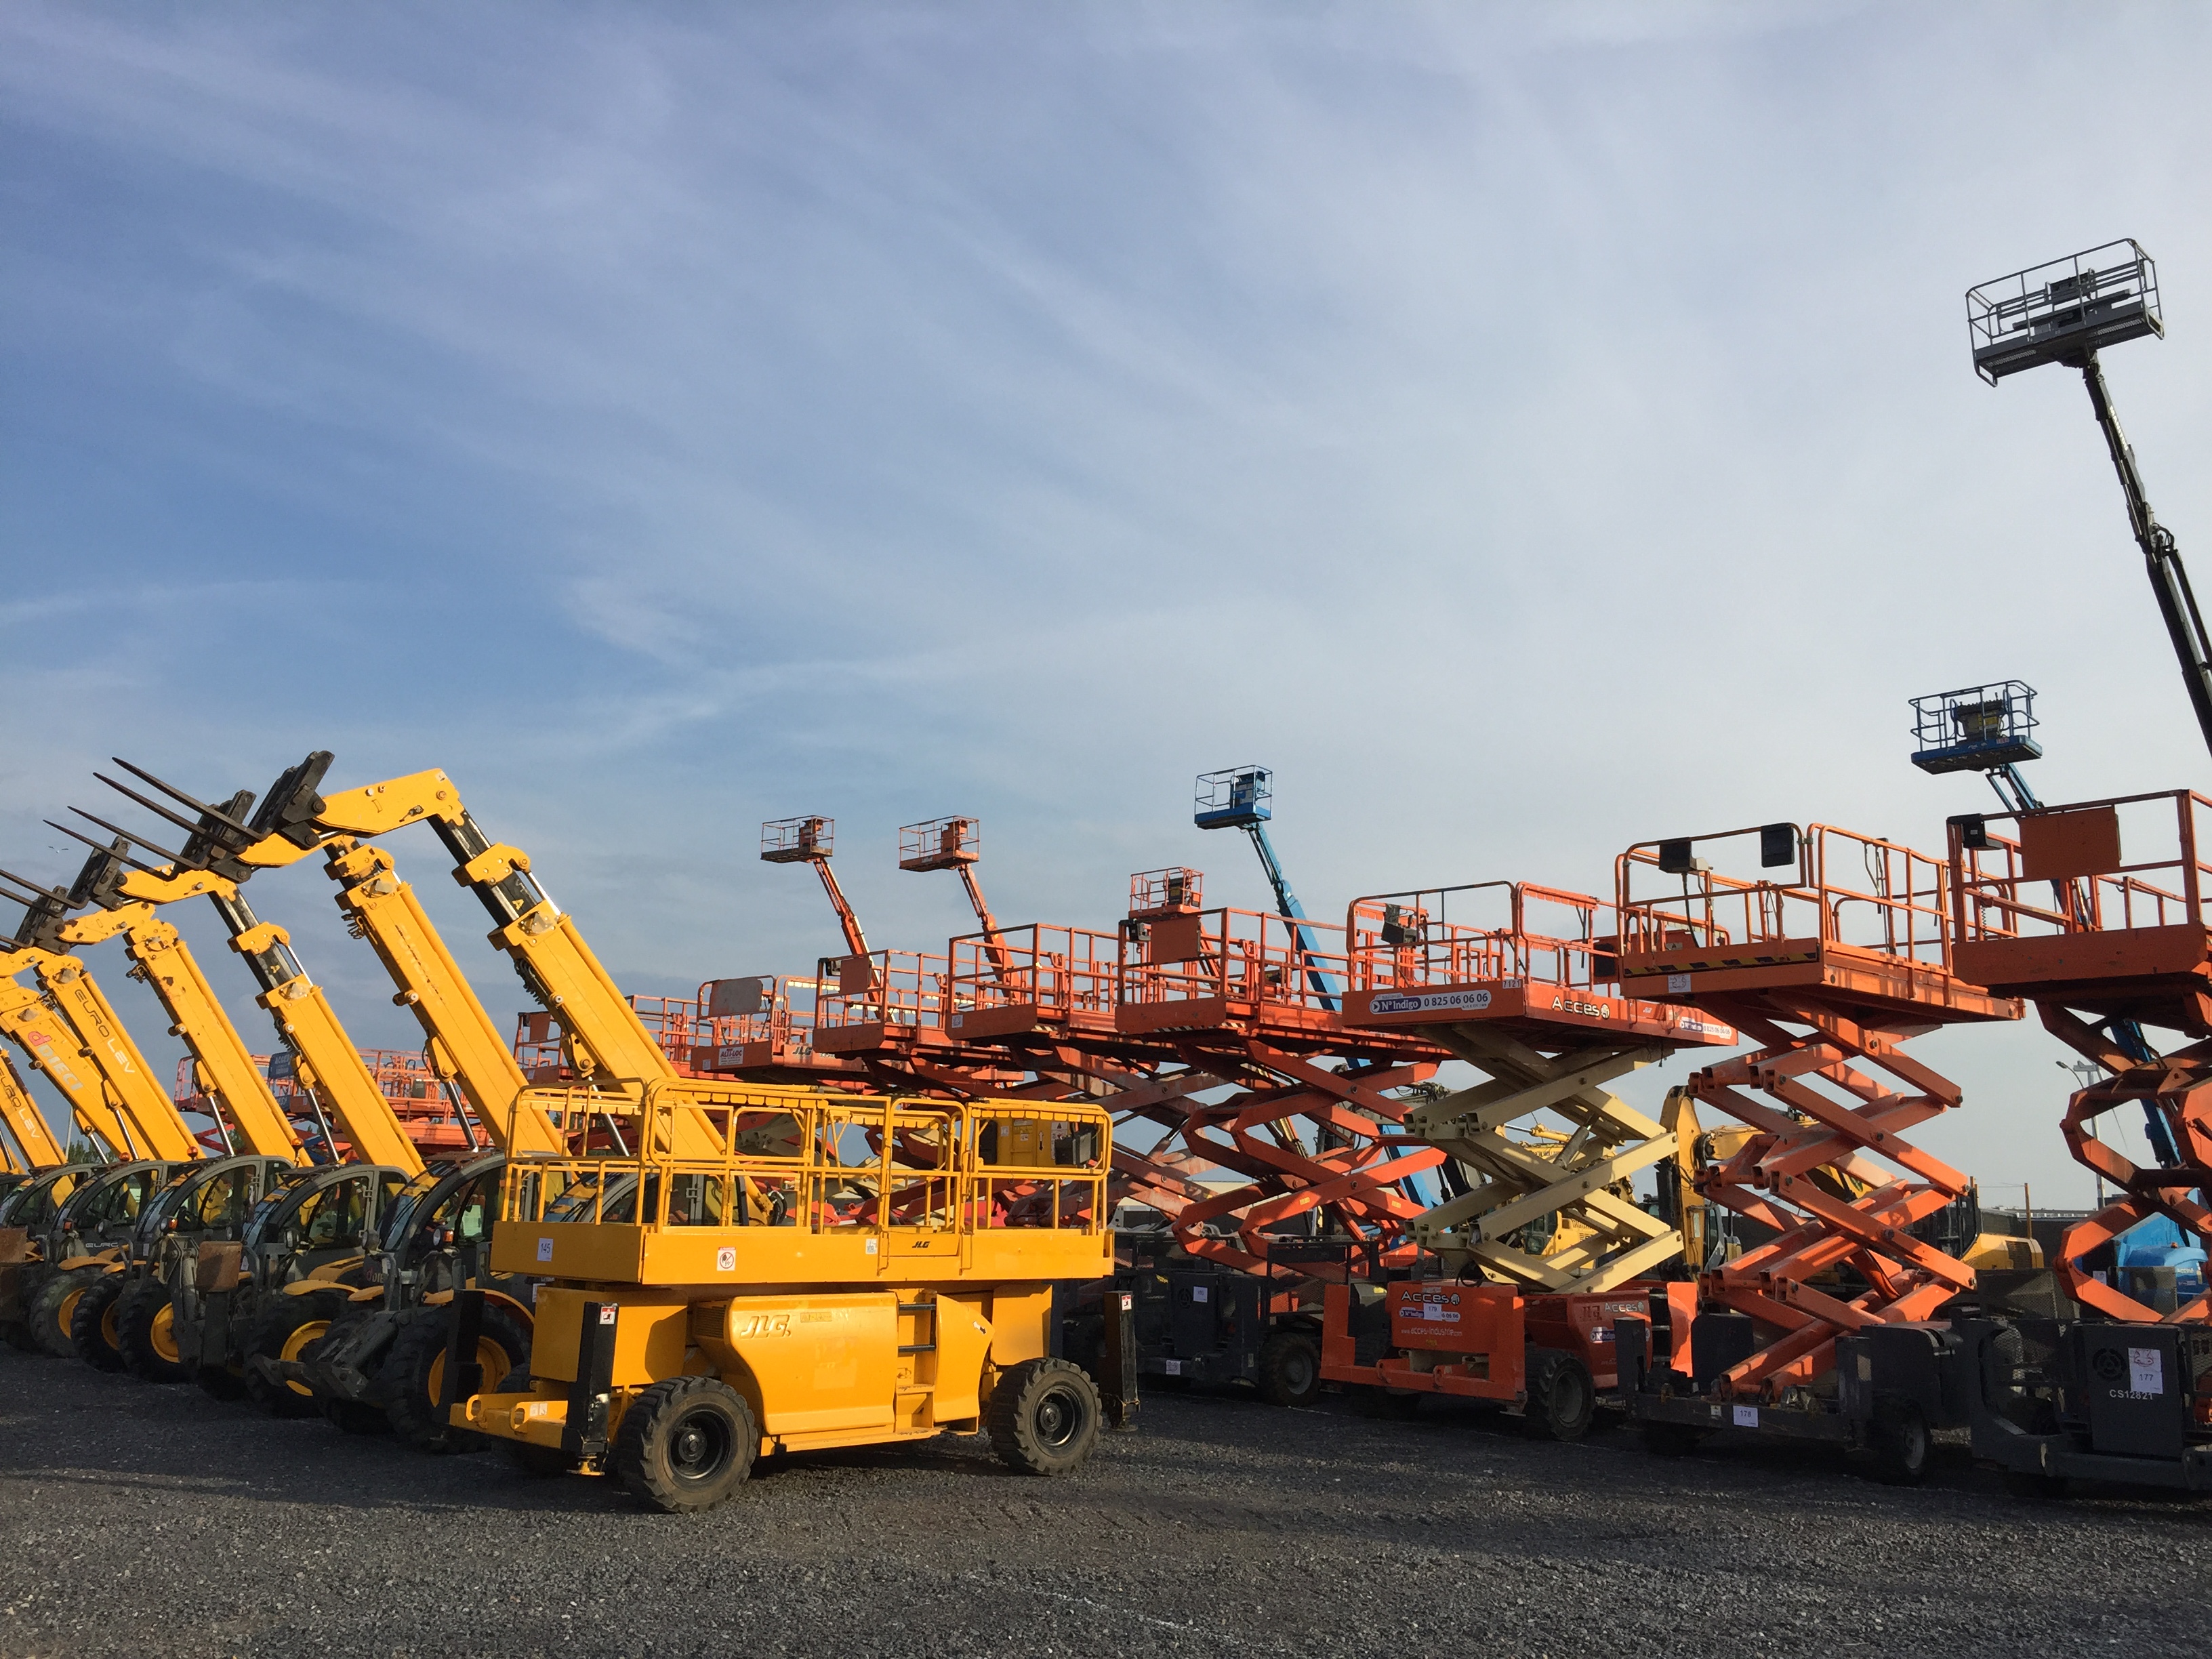 Machines lined up at Equippo Auction's yard in Zeebrugge